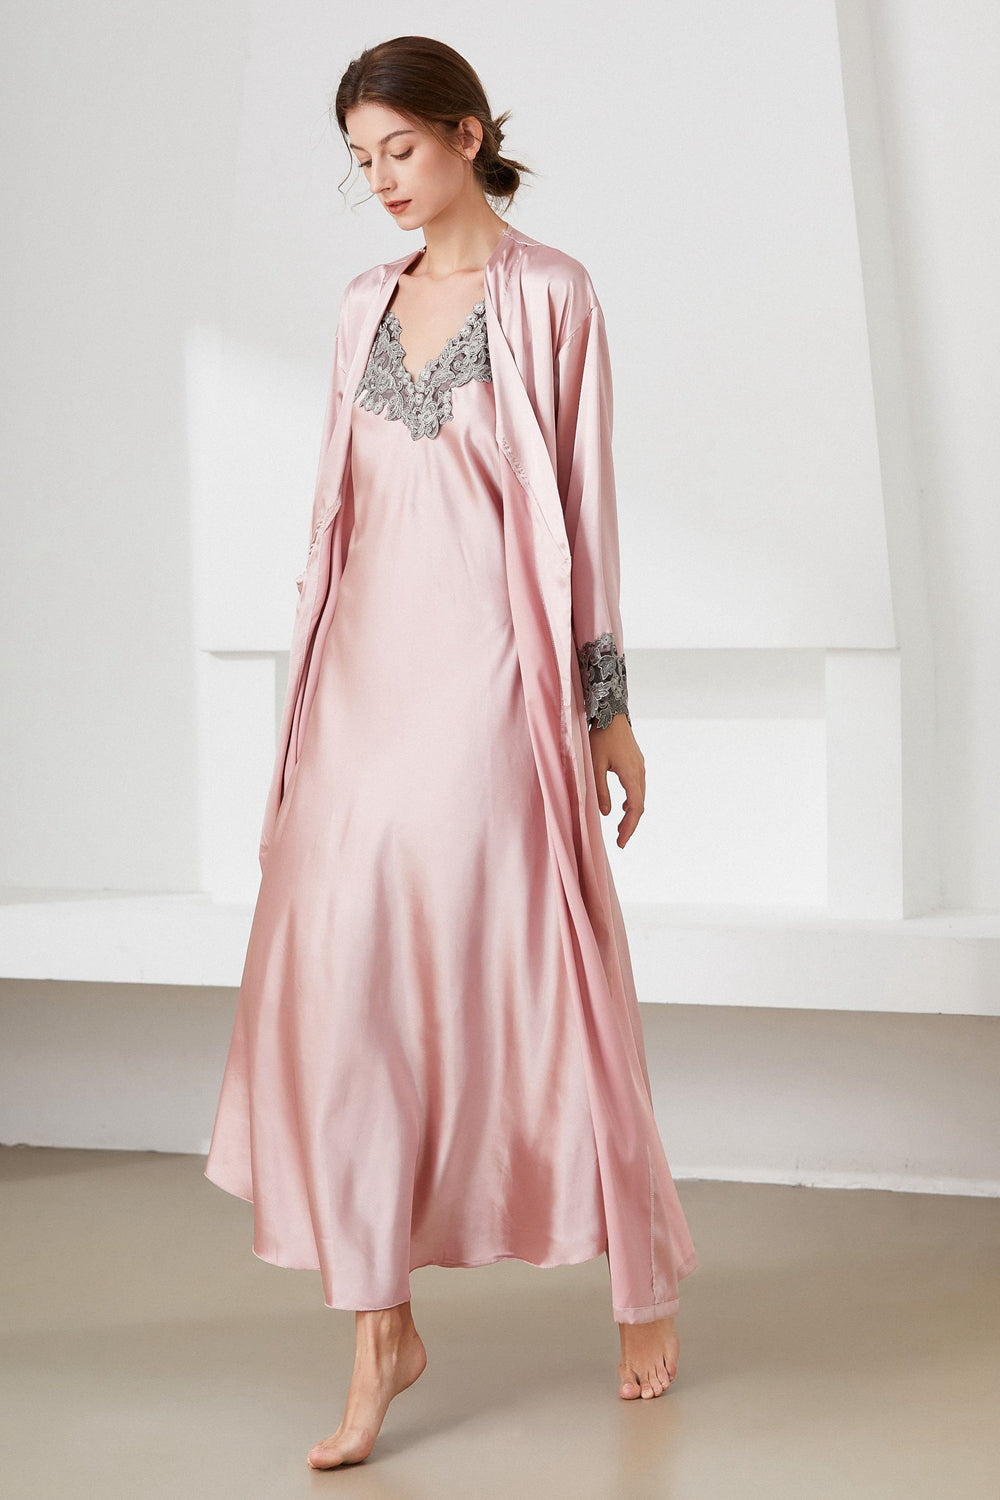 Contrast Lace Trim Satin Night Dress and Robe Set – The Gypsy Den